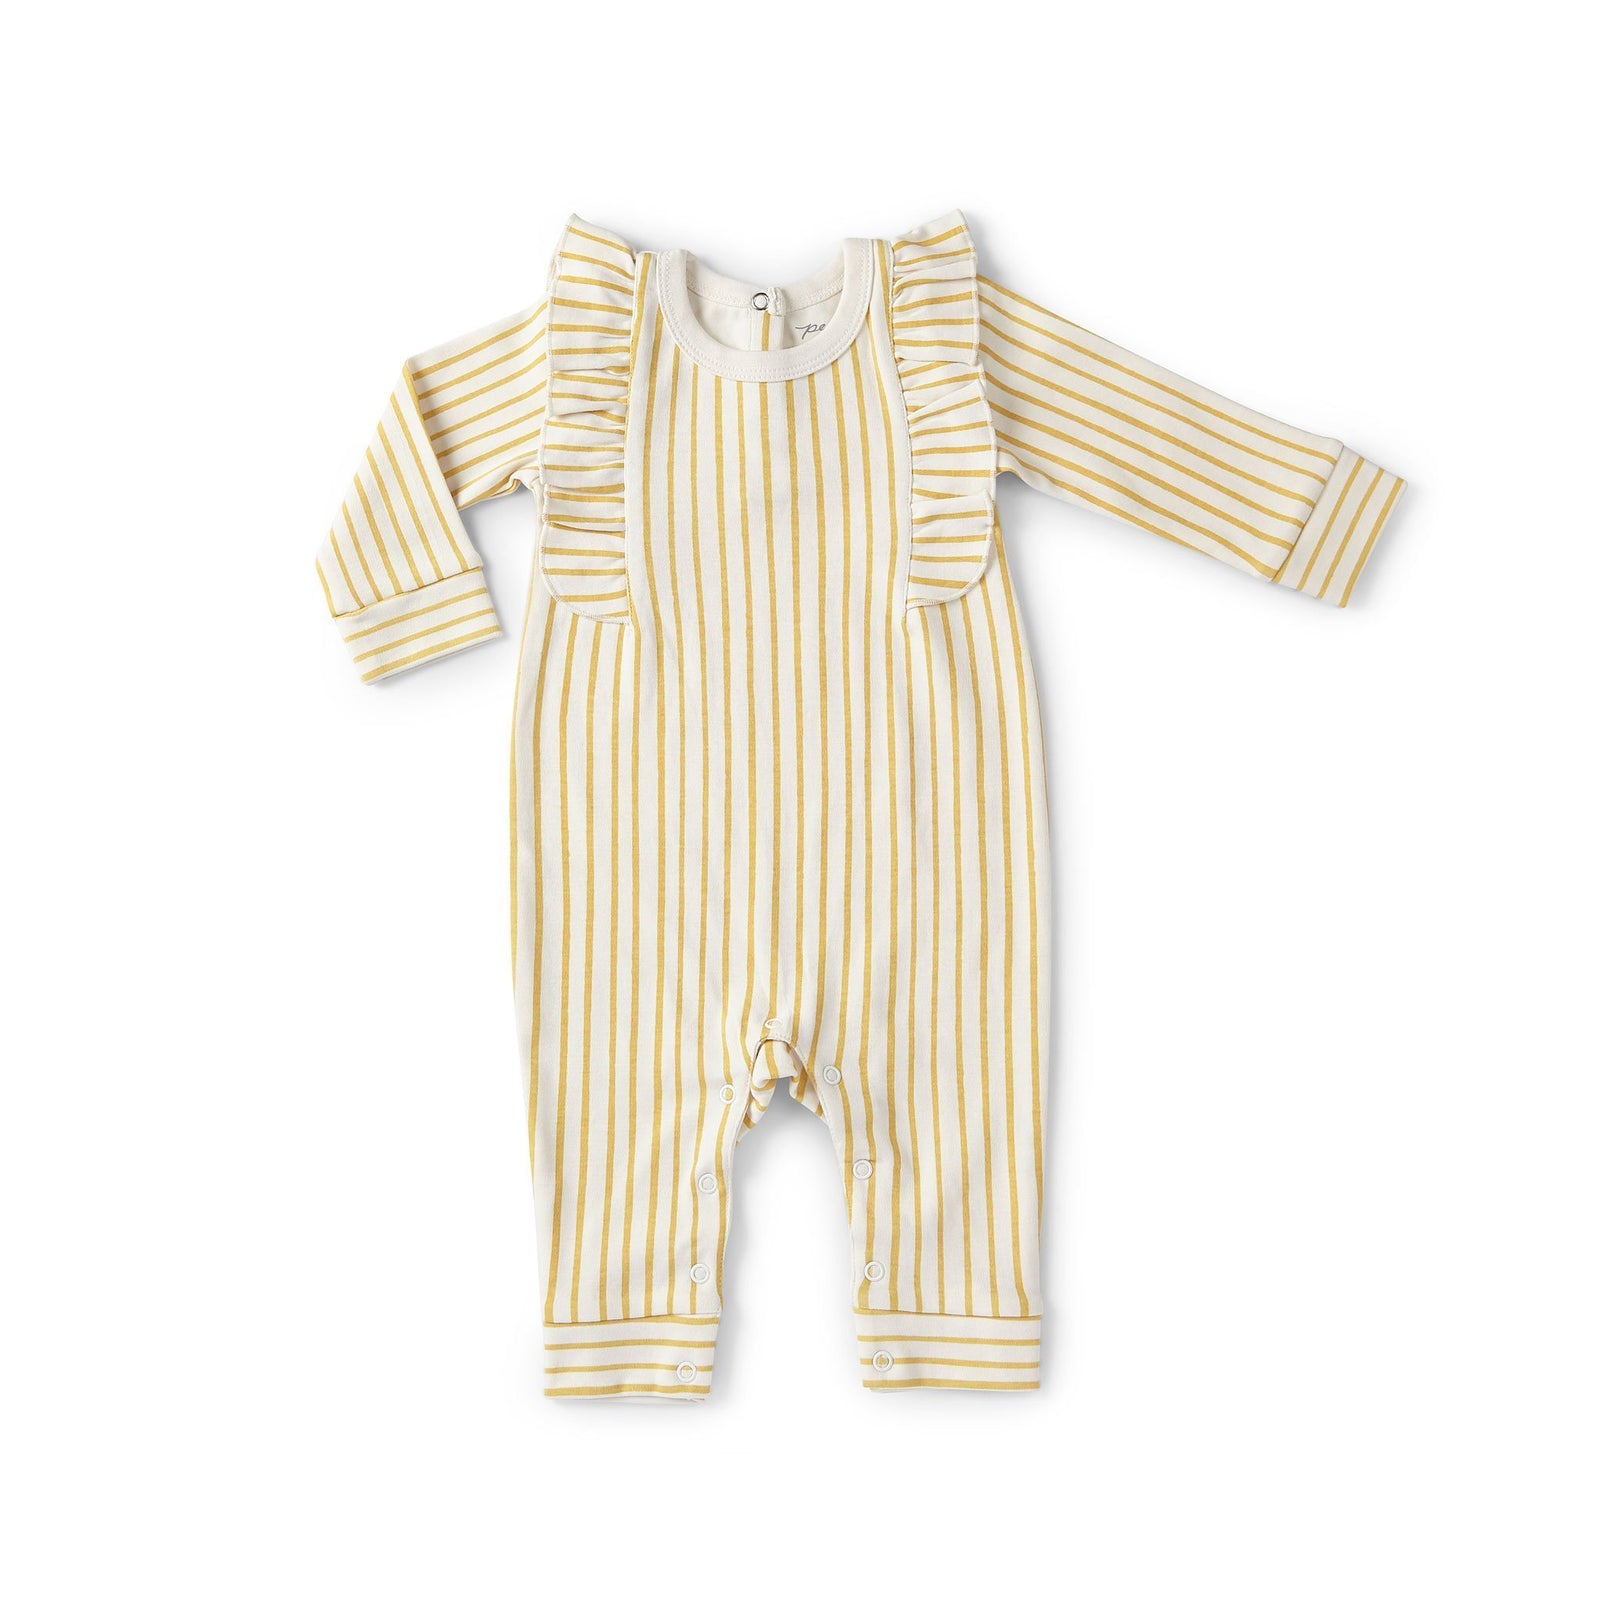 Pehr Long Sleeve Stripes Away Marigold w/Ruffle Romper. Certified organic cotton. White with gold stripes.